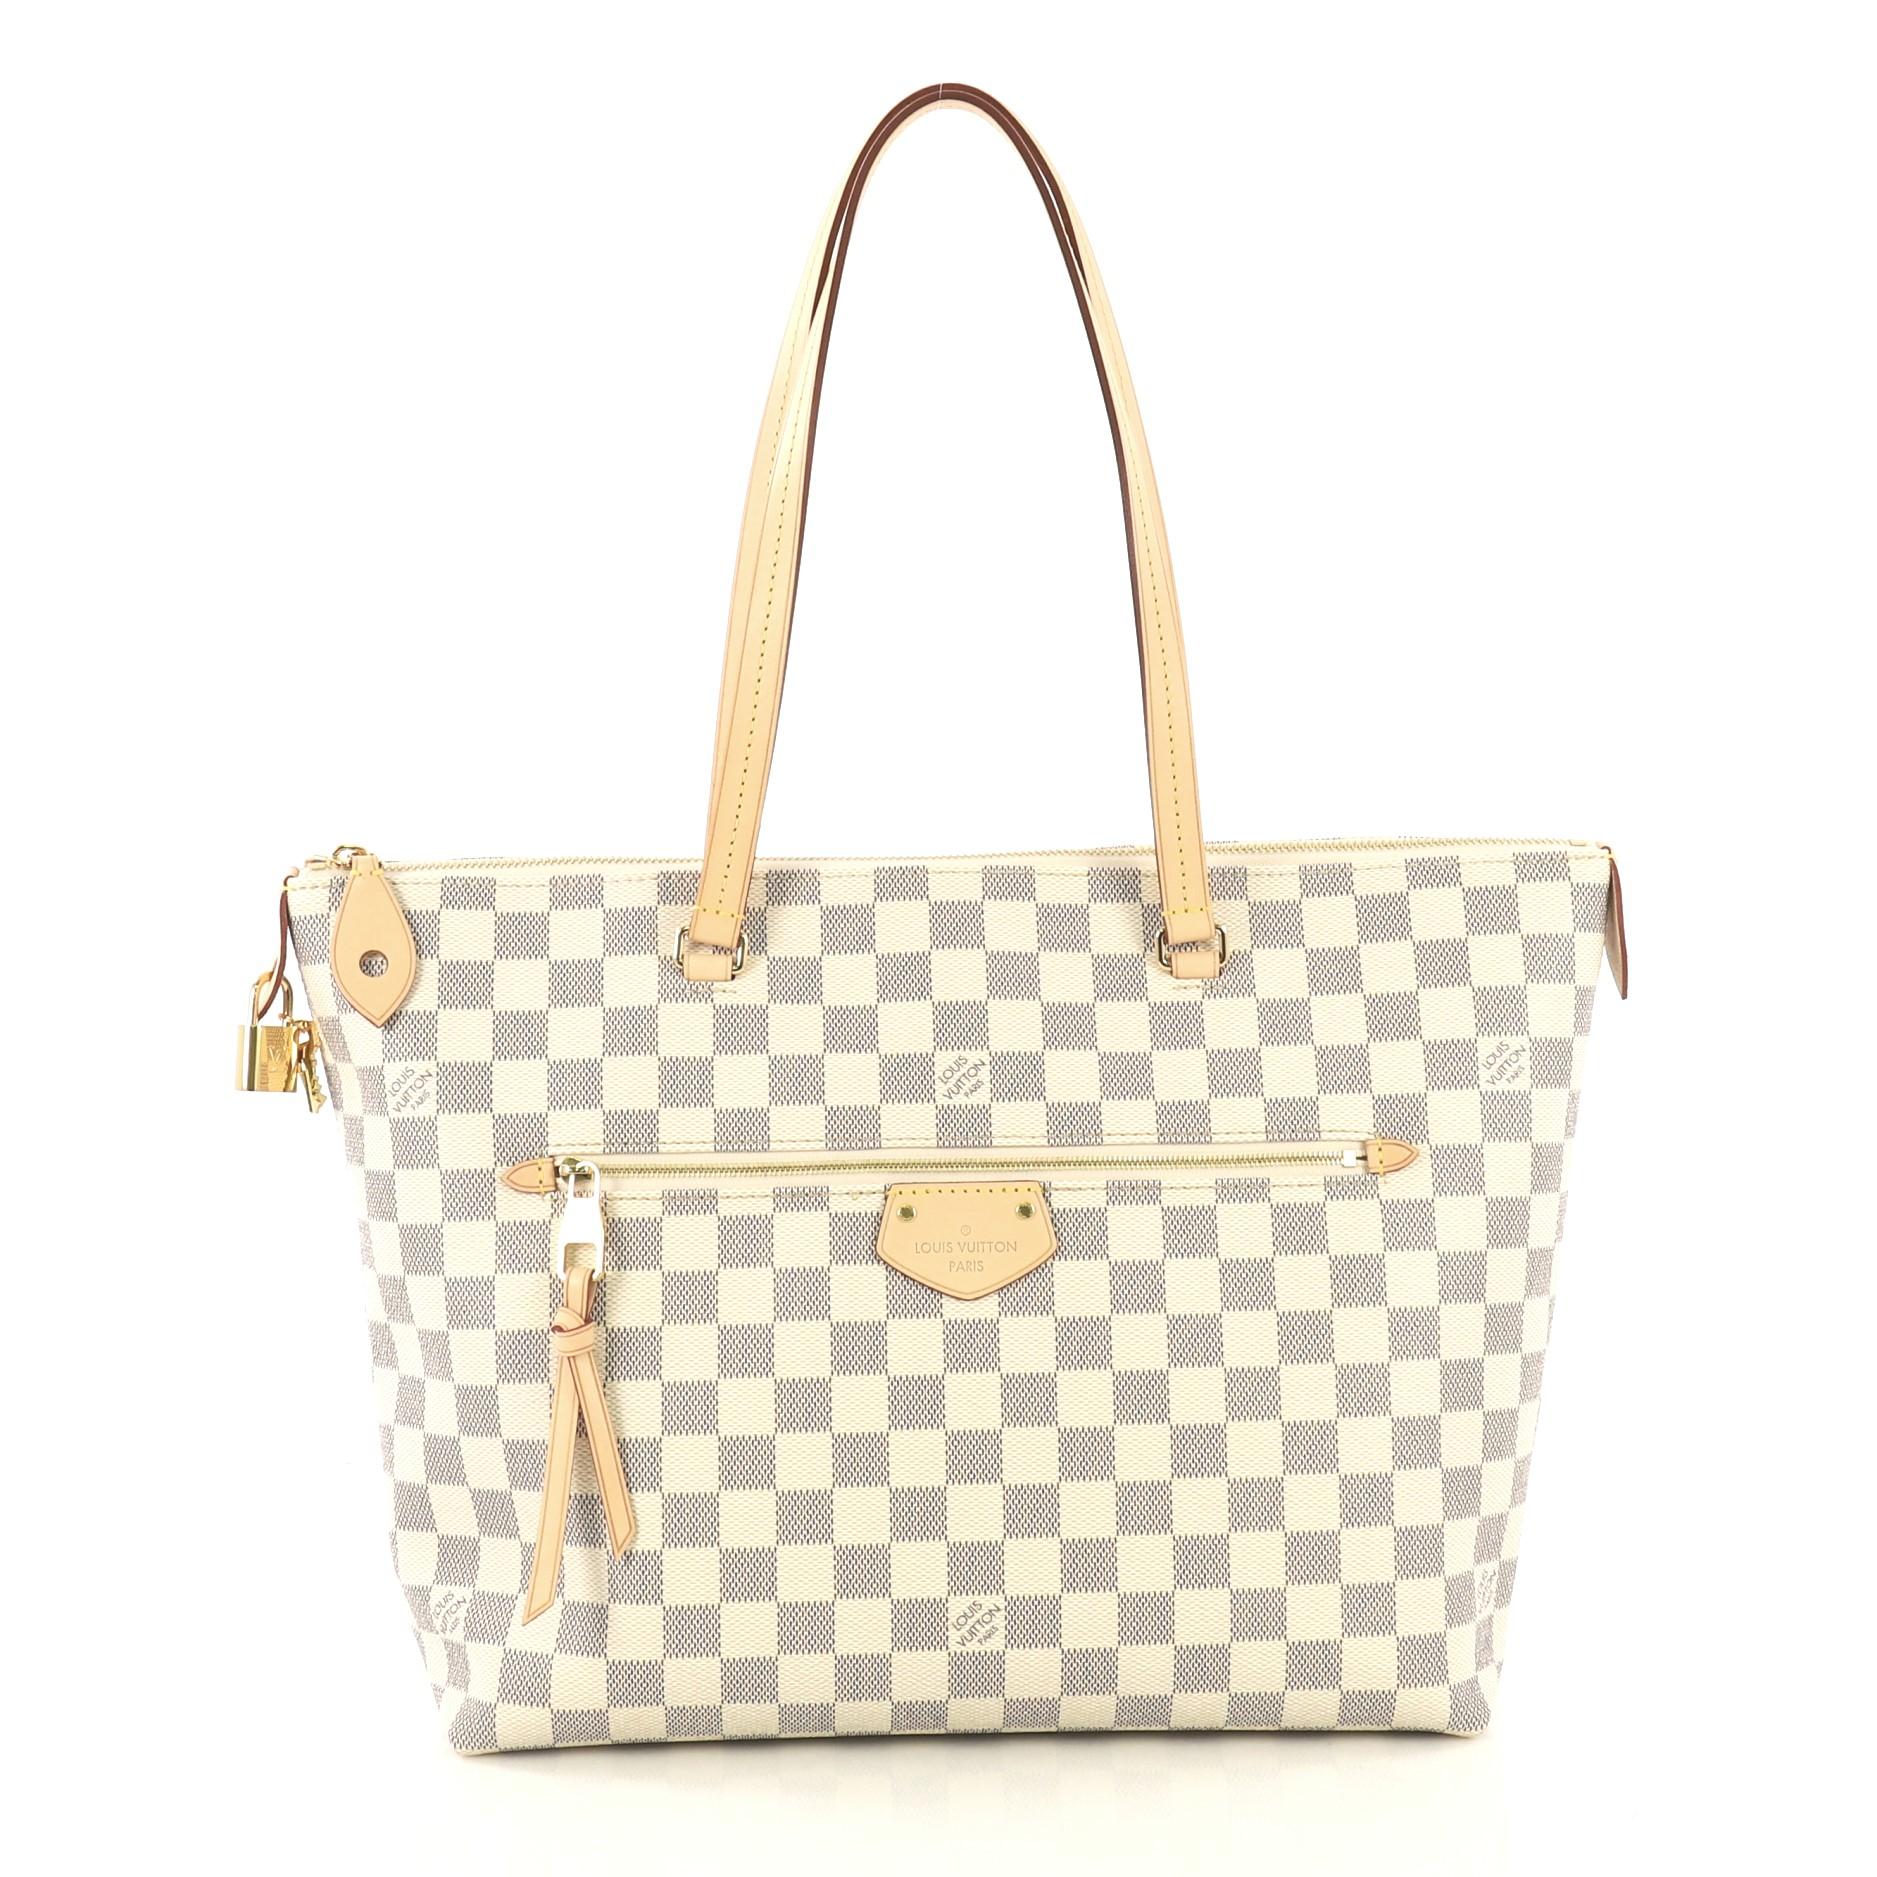 This Louis Vuitton Iena Tote Damier MM, crafted in damier azur coated canvas, features dual flat shoulder handles, natural cowhide leather trims, exterior zip pocket, and gold-tone hardware. Its zip closure opens to a pink fabric interior with slip